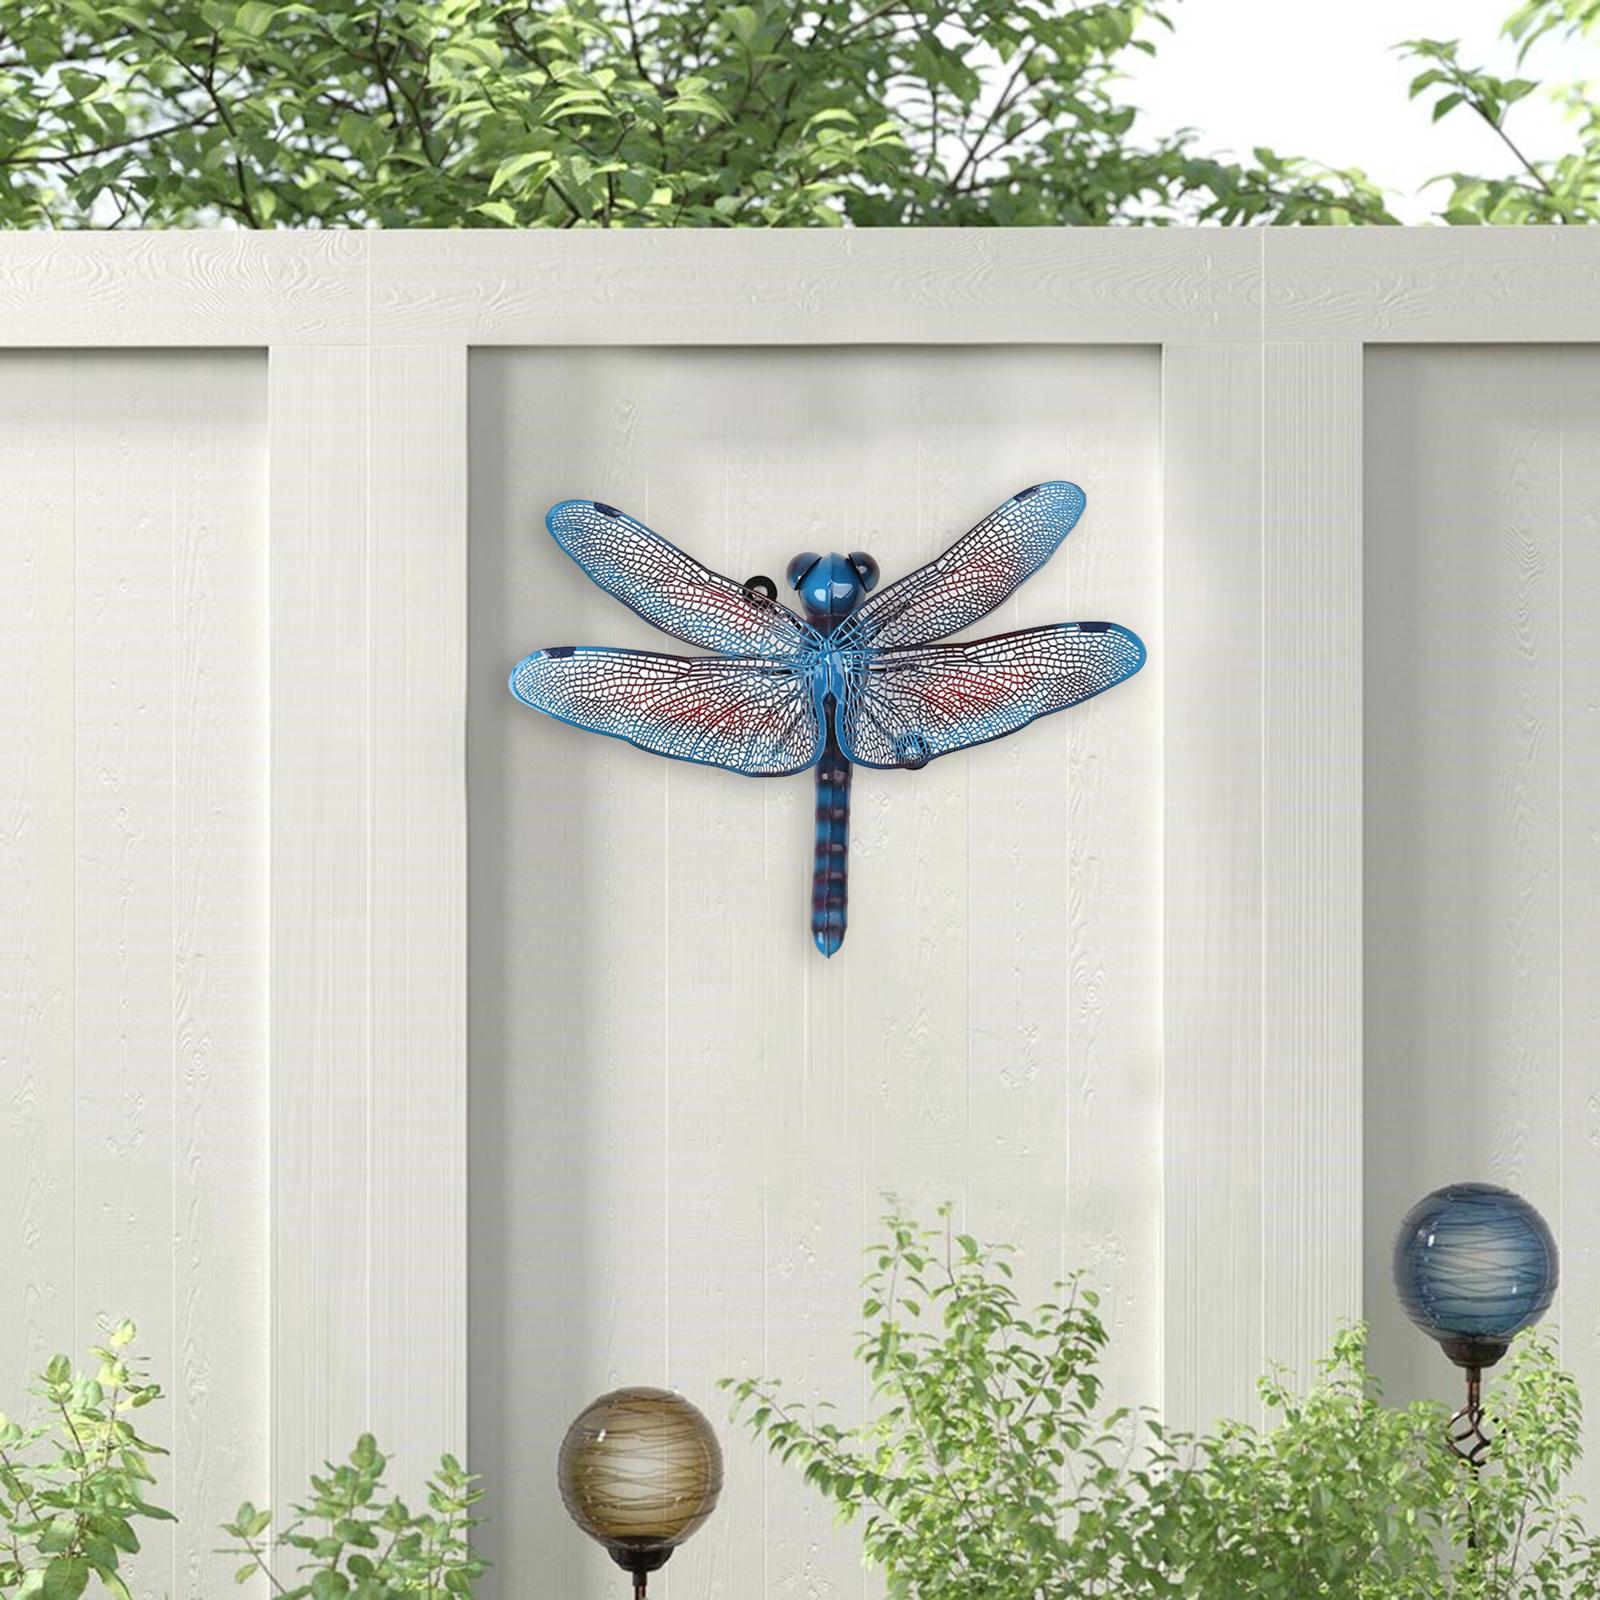 Metal Wall Dragonfly Decorations Art Crafts Decoration for Farmhouse Garden blue